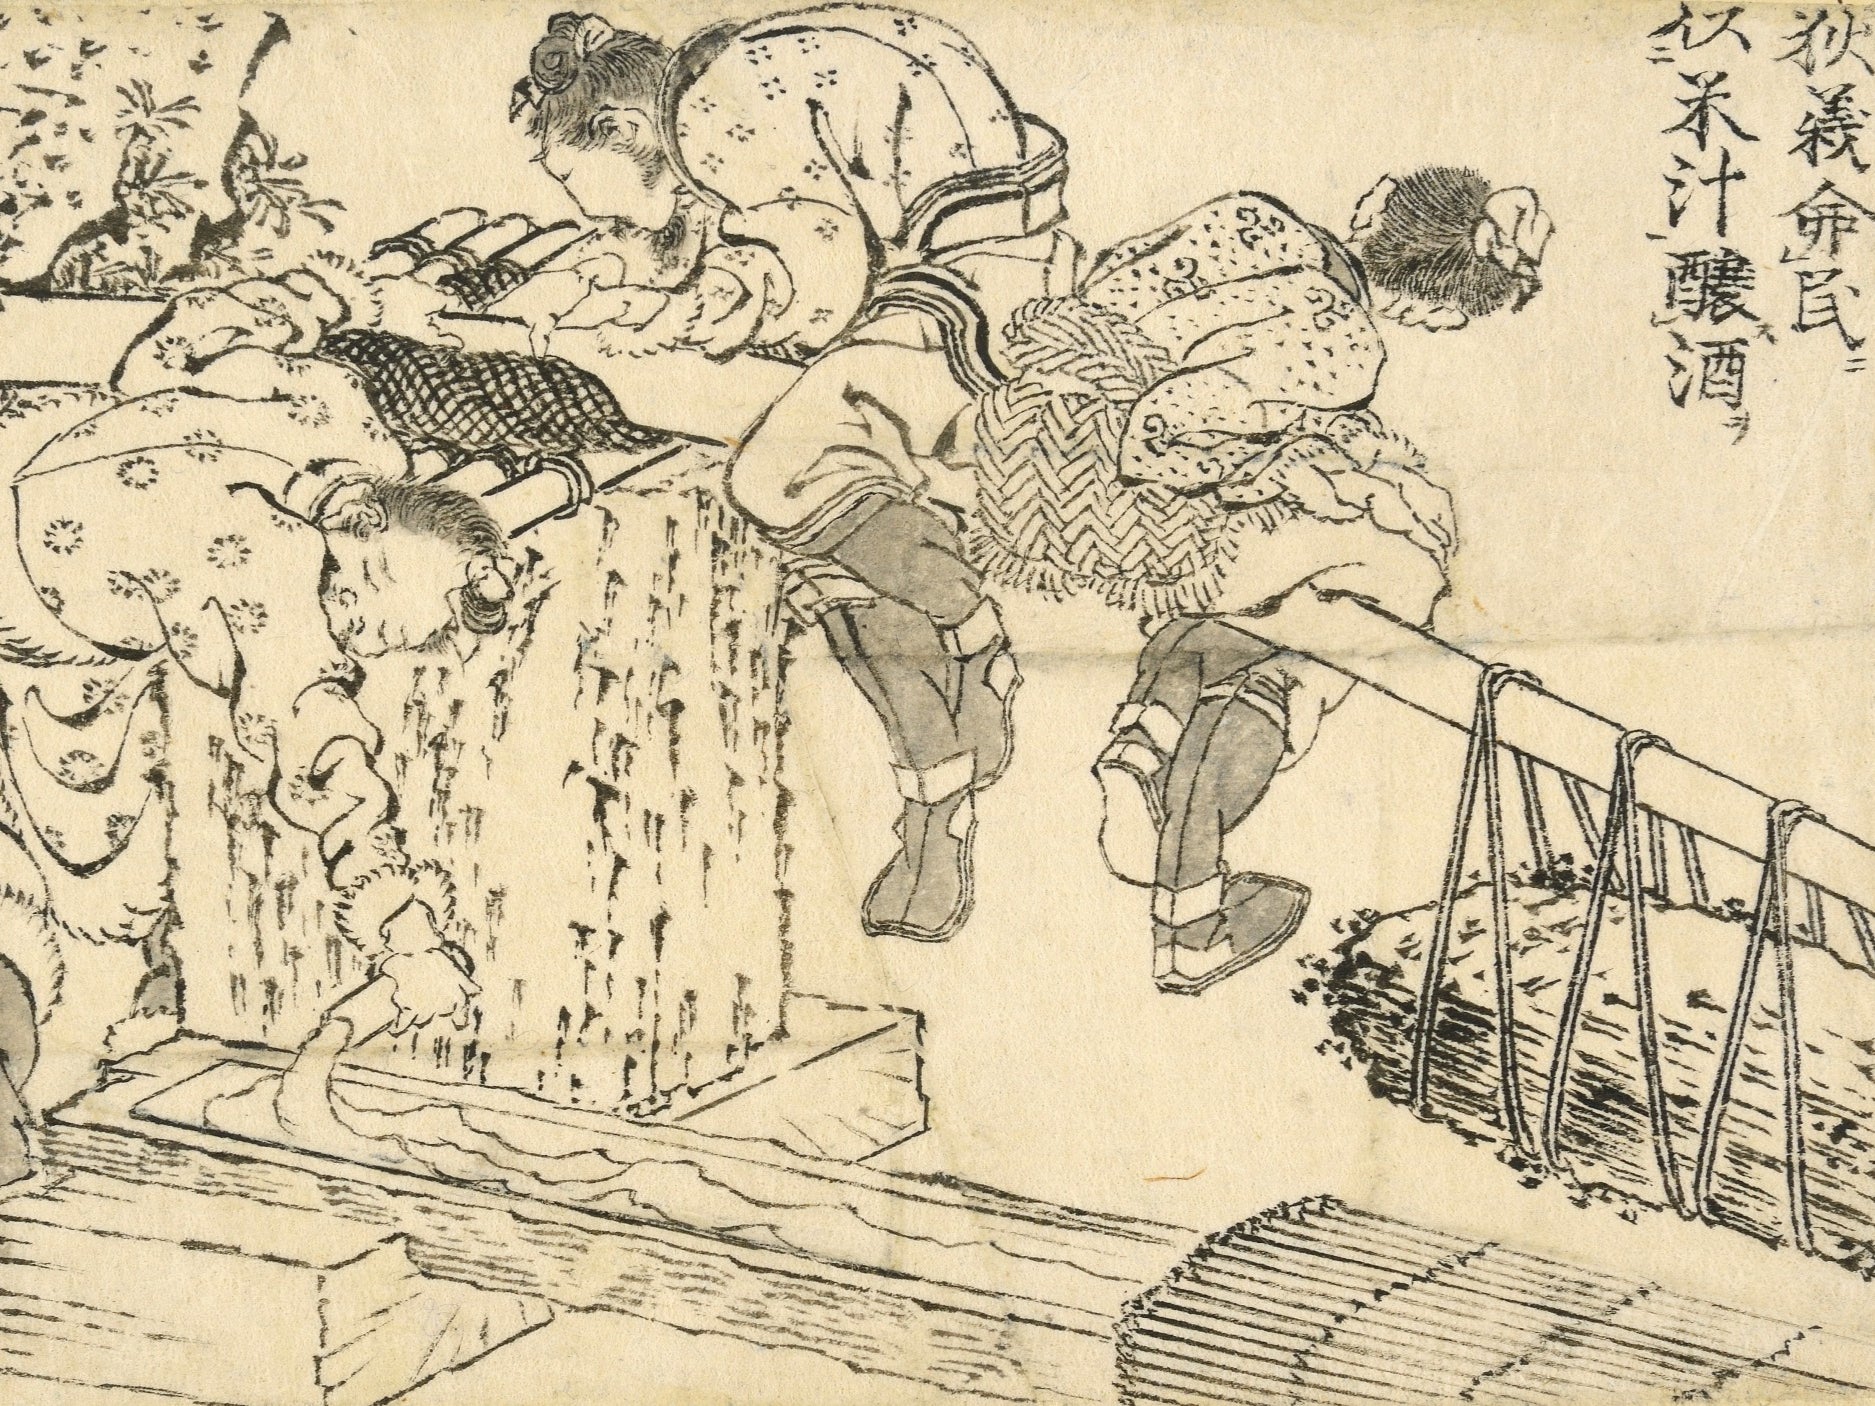 Hokusai More than 100 lost works by non-western worlds most famous artist rediscovered The Independent picture